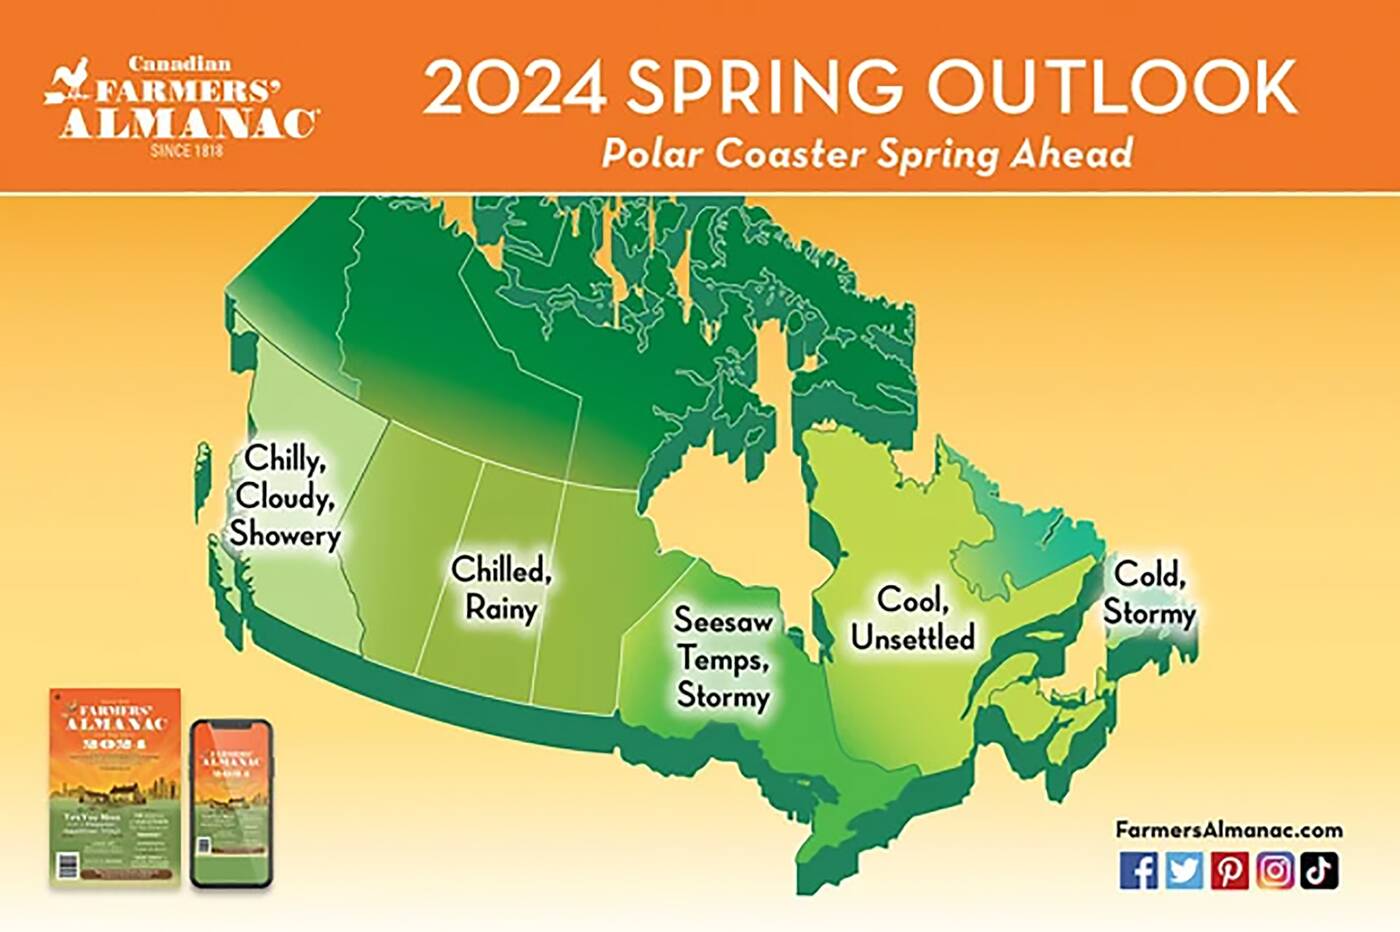 The spring forecast is out for 2024 and here's what to expect in